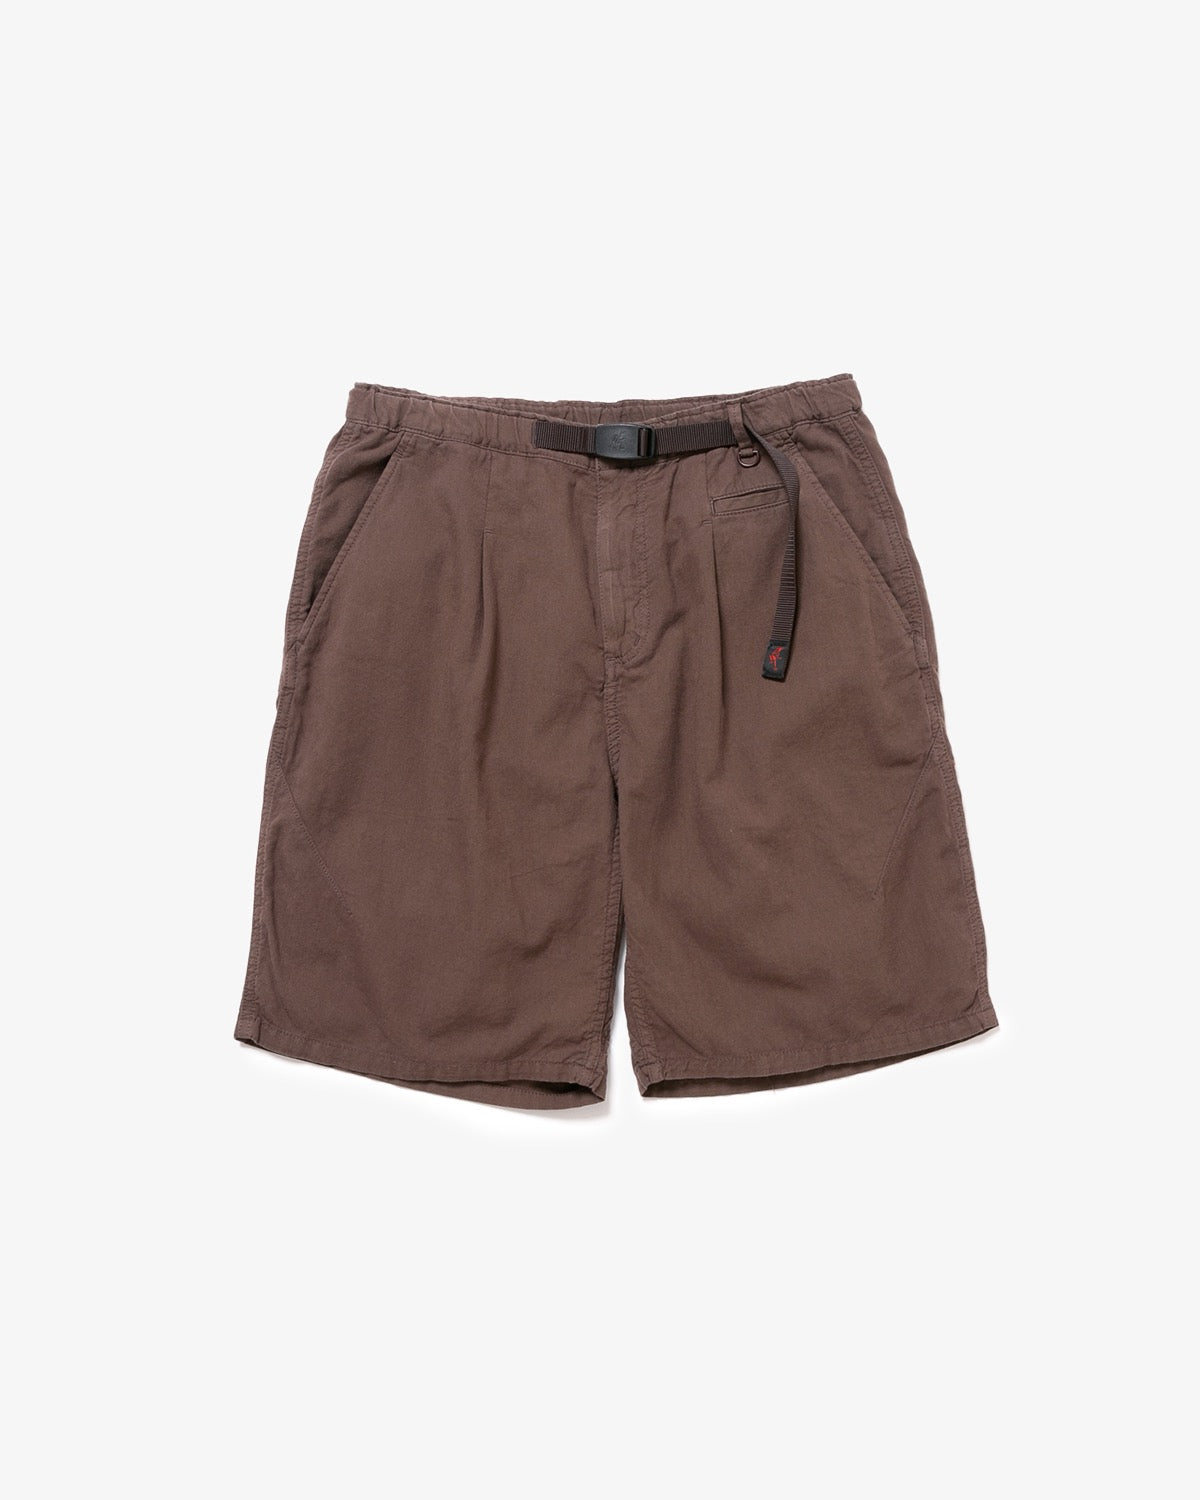 WALKER EASY SHORTS COTTON PAPER VIERA OVERDYED by GRAMICCI